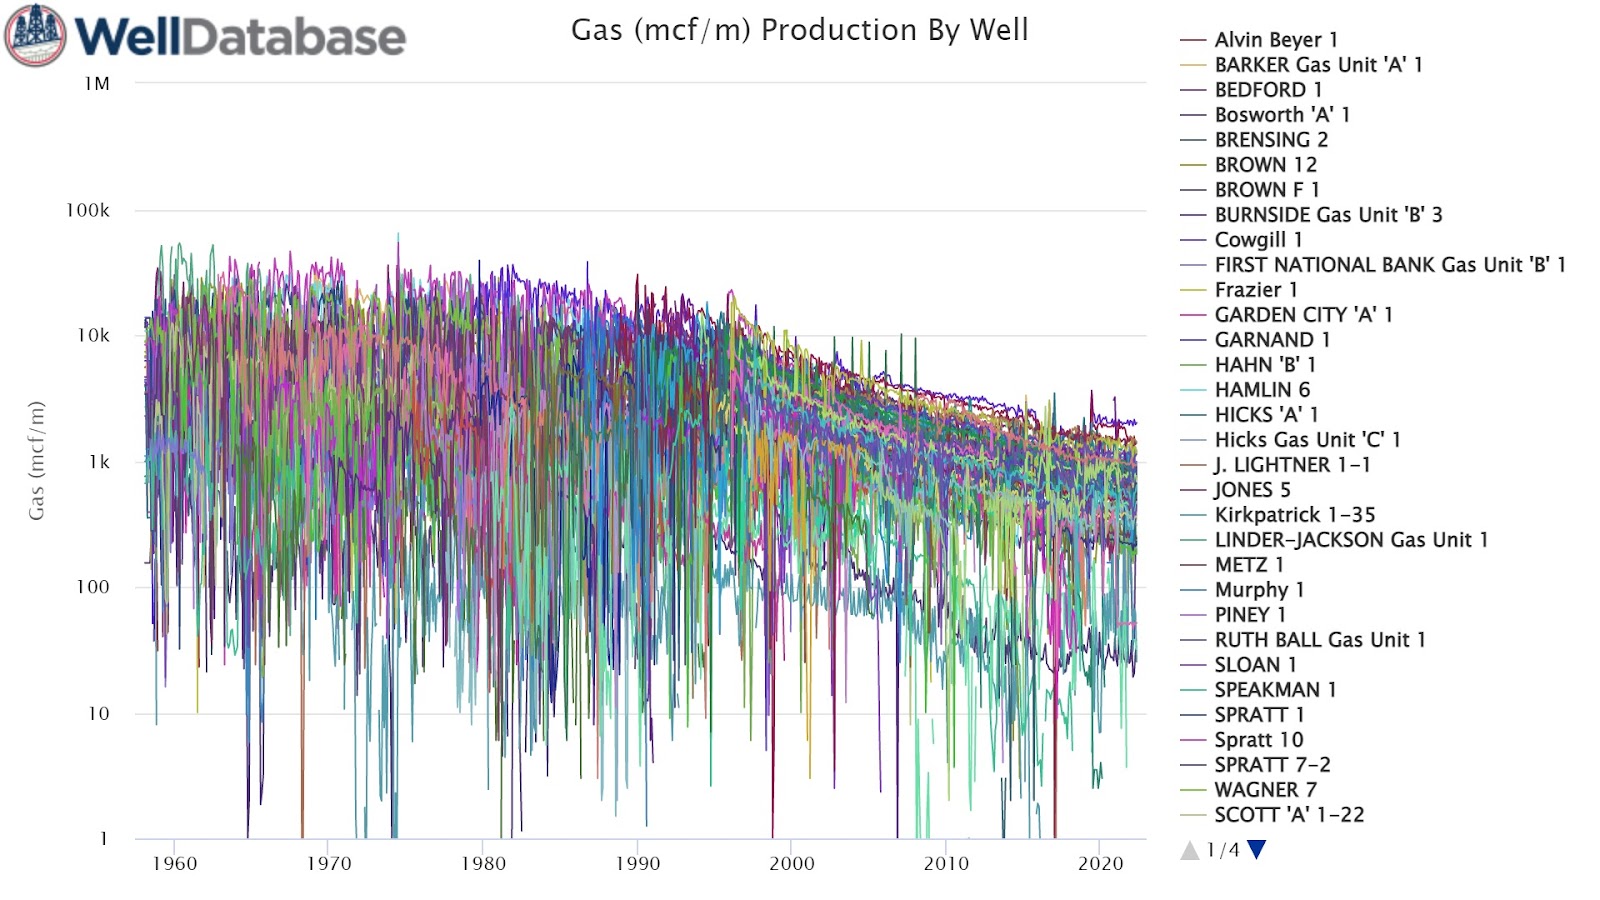 Gas production in mcf/month by well in the Hugoton Gas Field